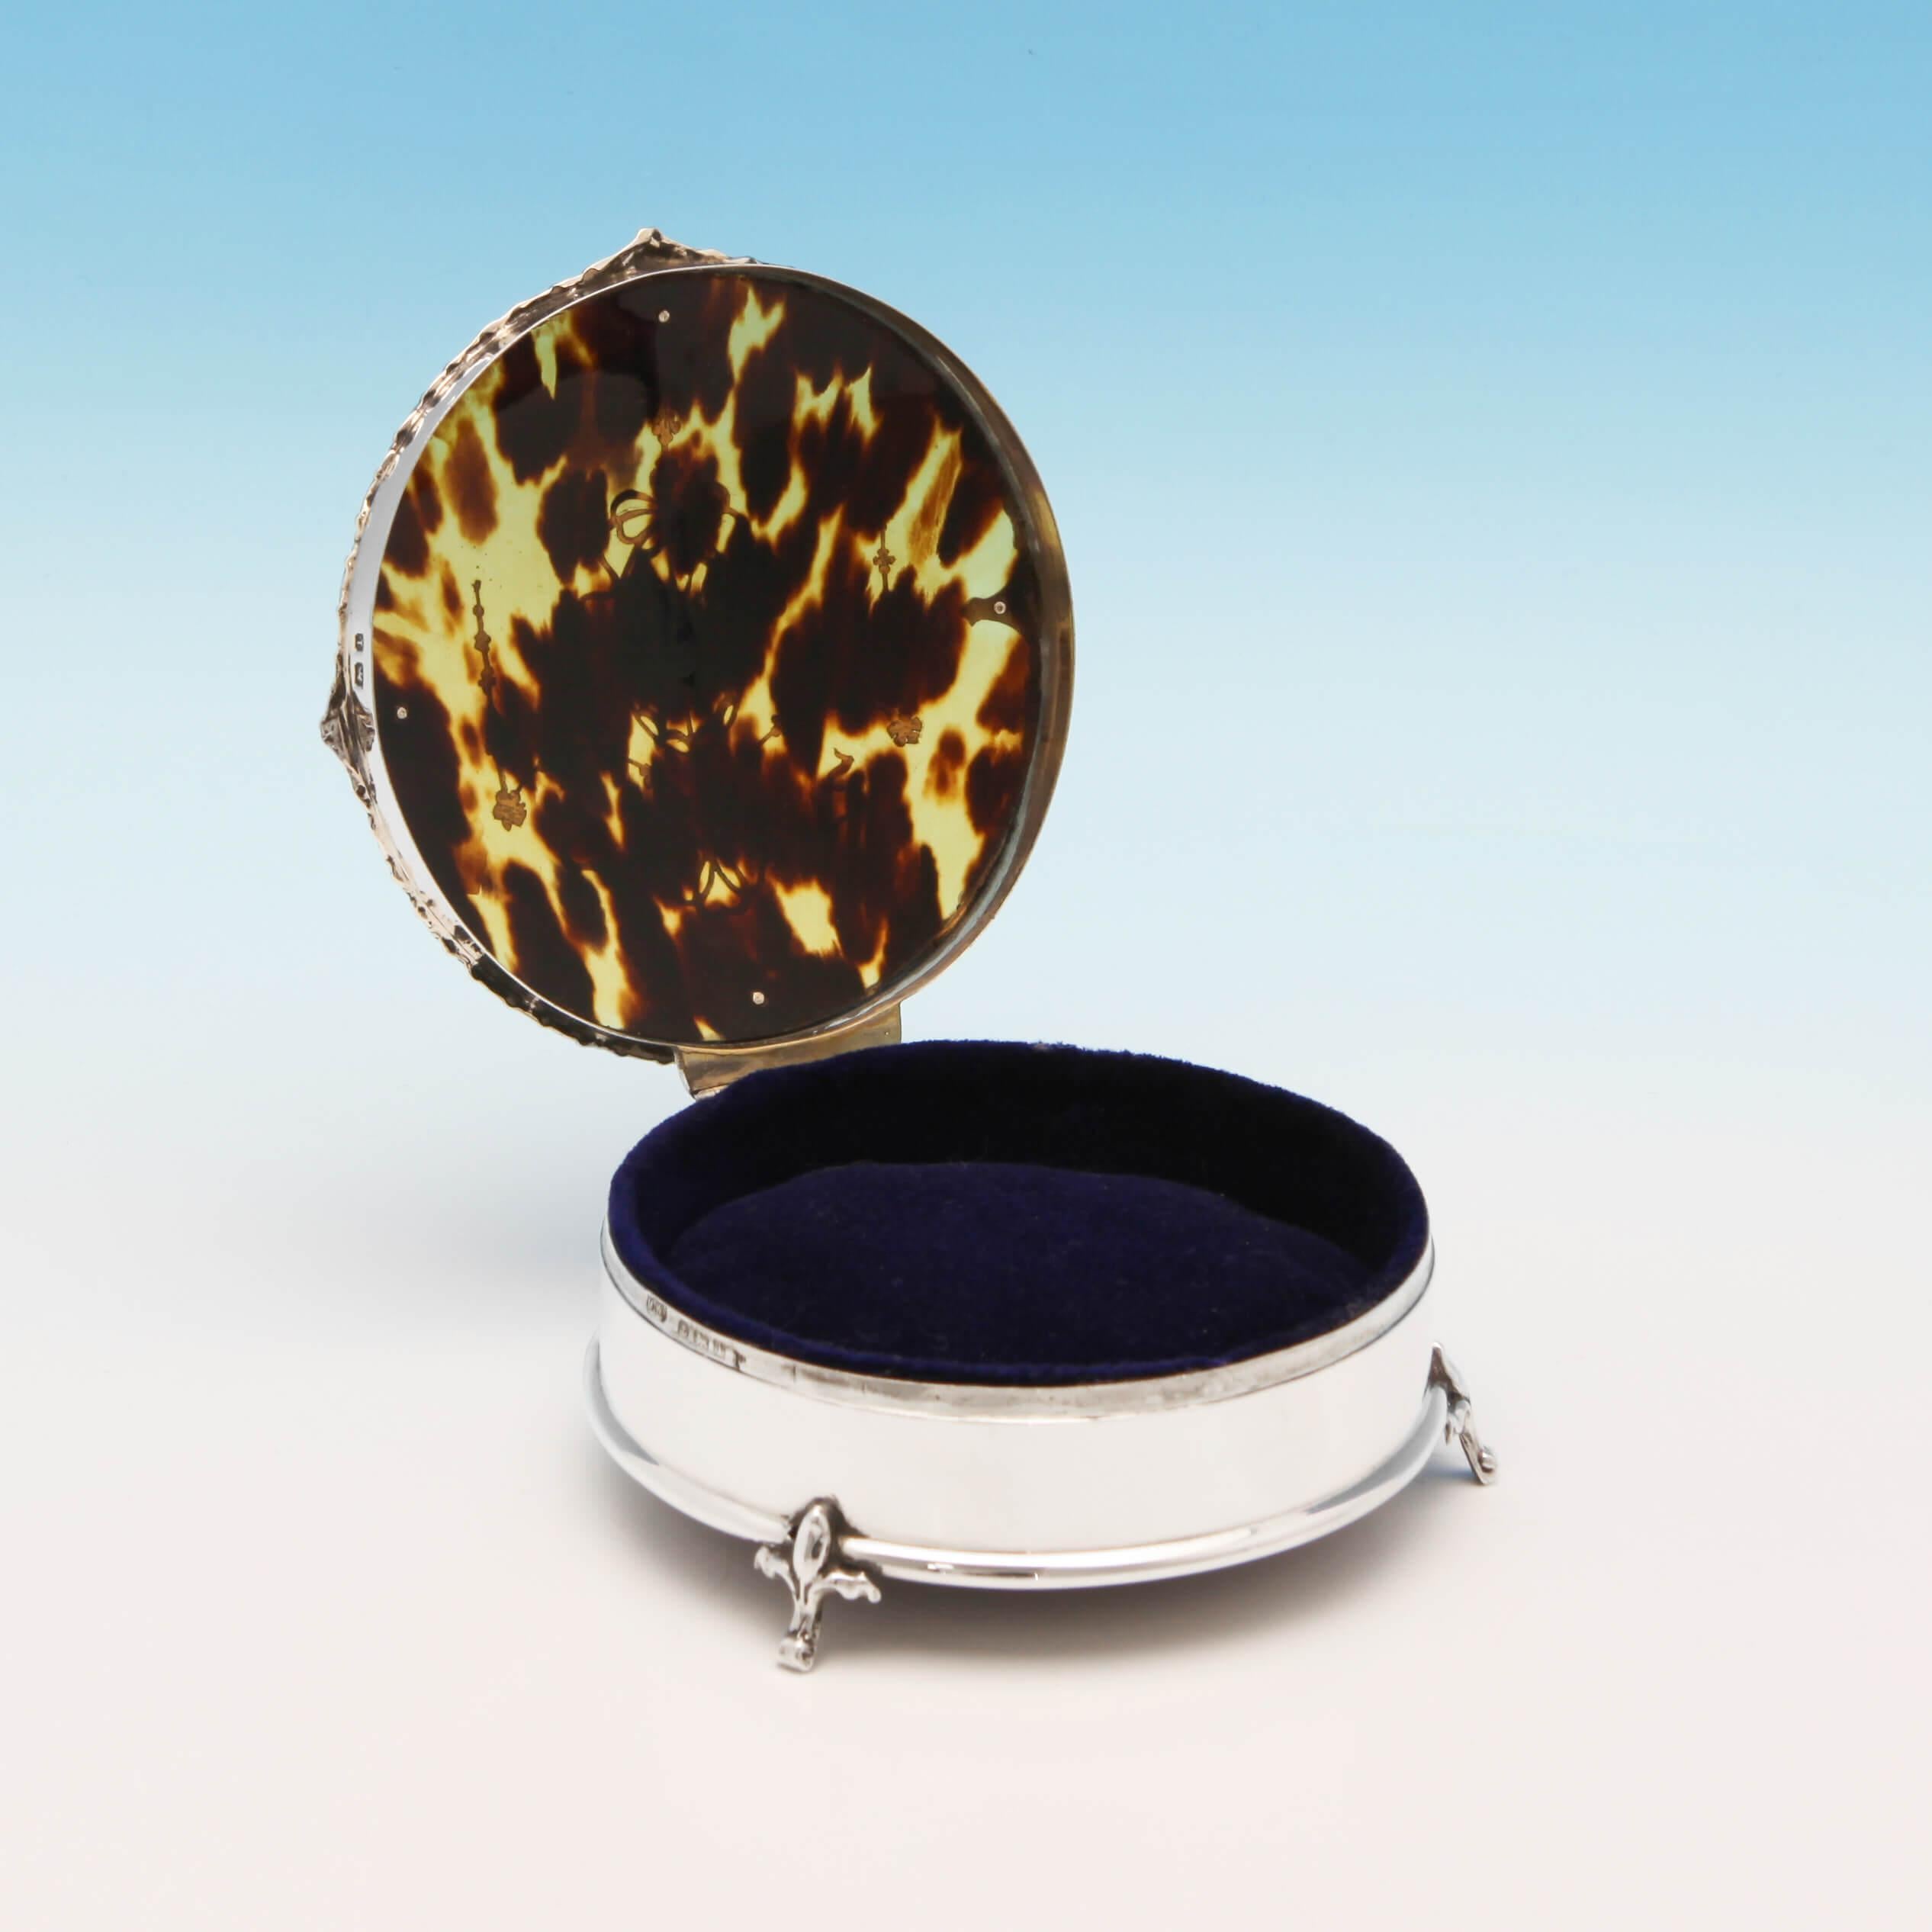 Hallmarked in Birmingham, in 1910, by Mappin & Webb, this pretty, George V, antique, sterling silver jewelry box, stands on three feet, and features a tortoiseshell lid with inlaid silver decoration, and a blue velvet lining. The jewelry box